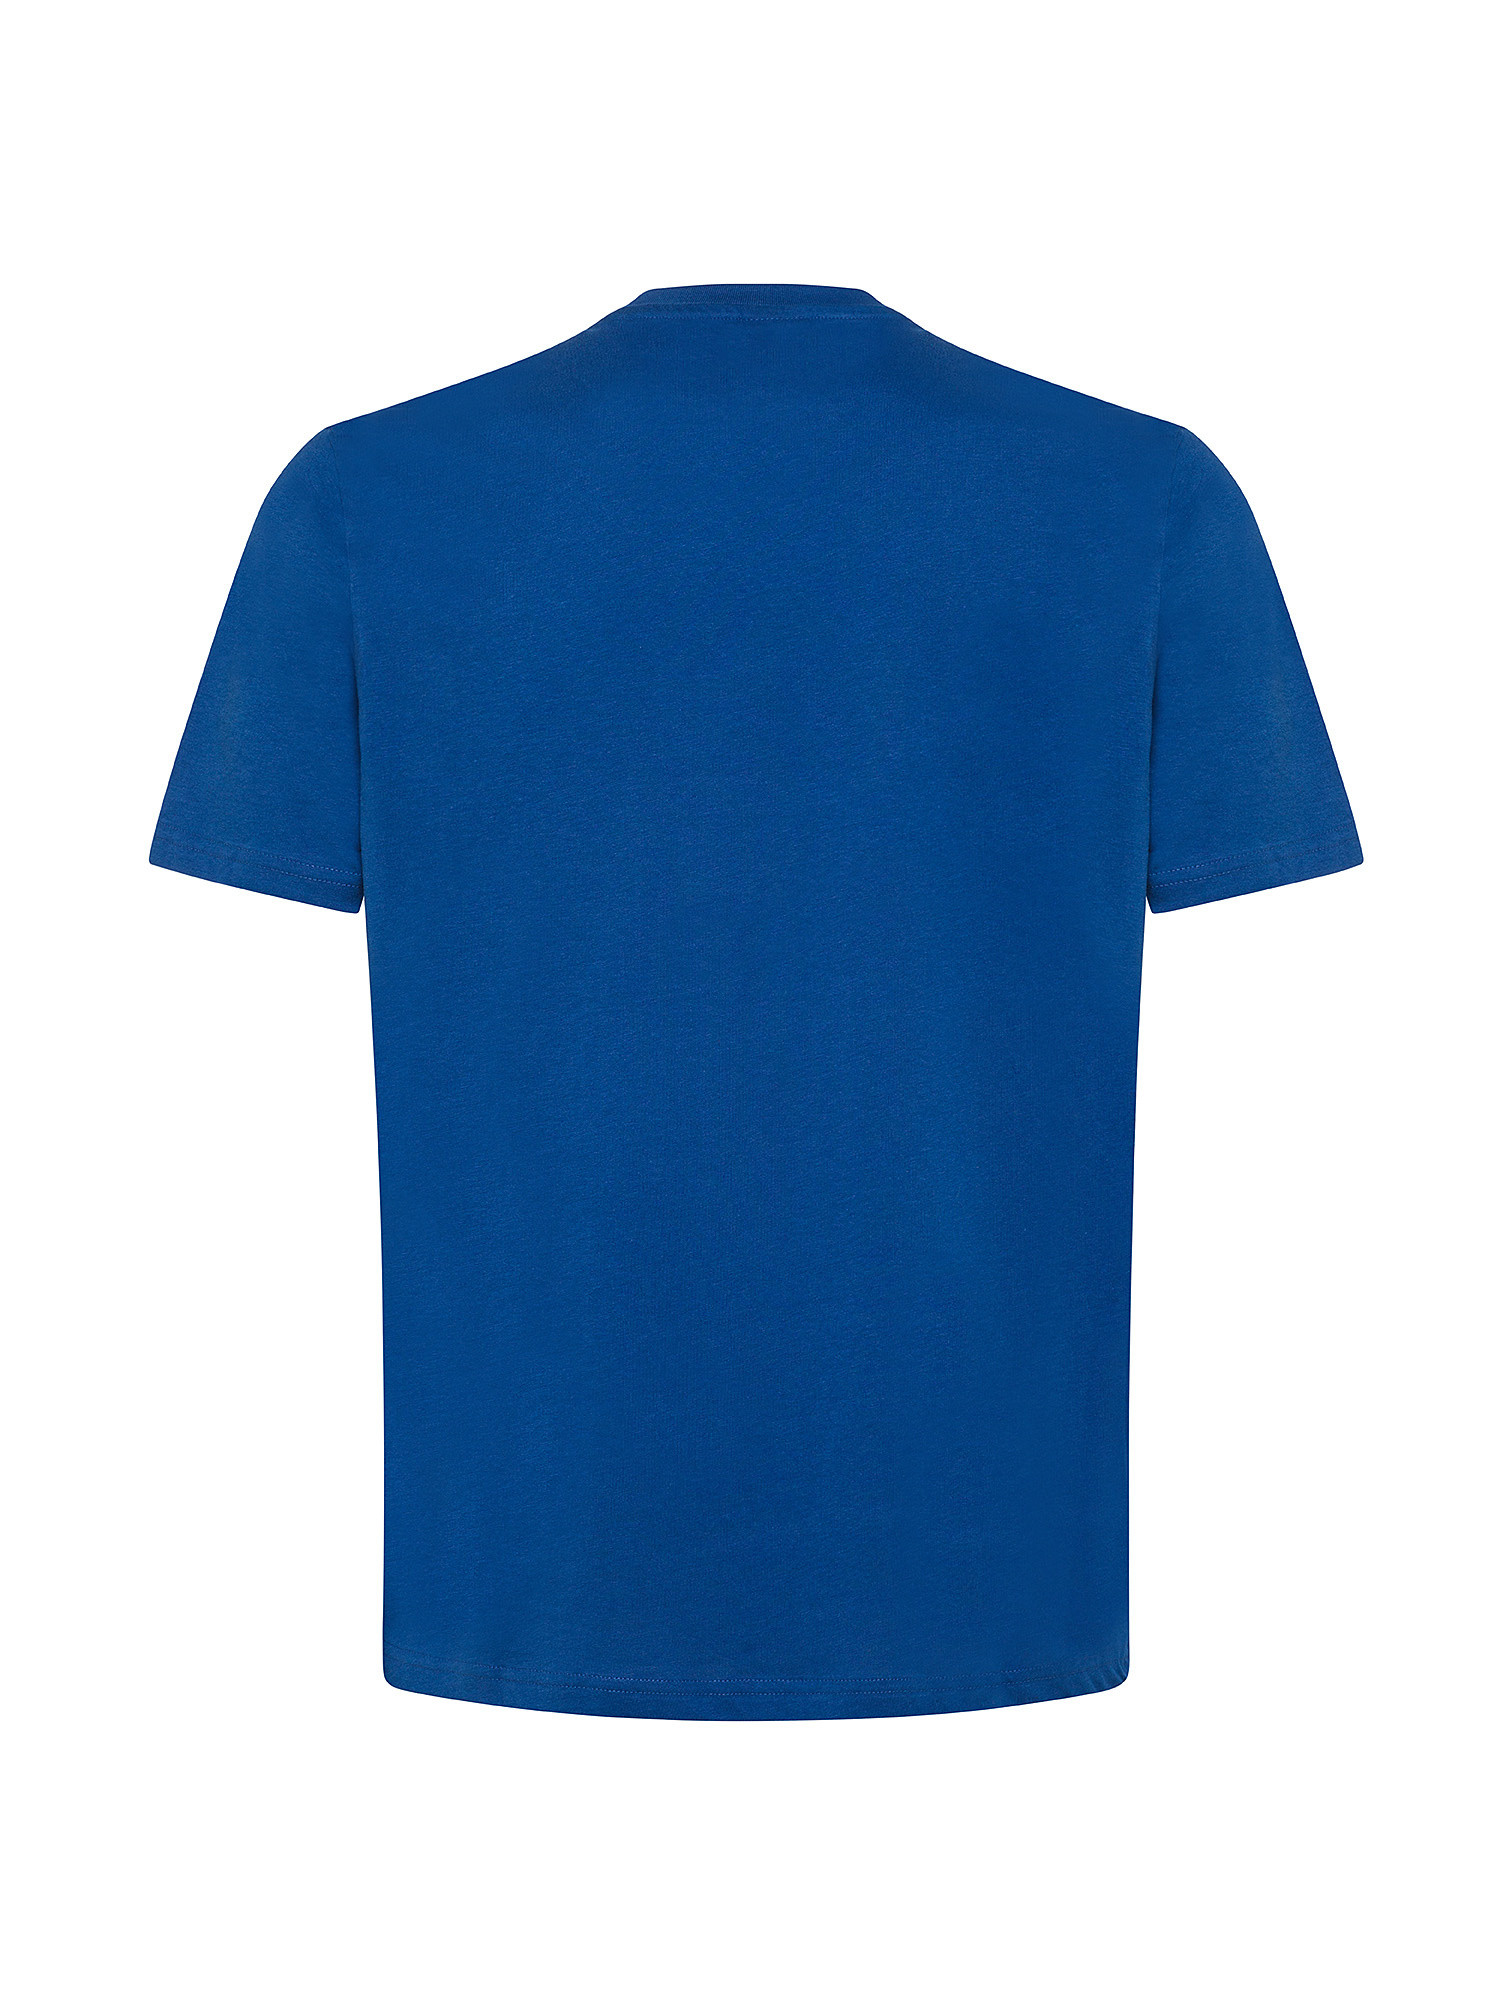 North sails - Organic cotton jersey T-shirt with printed maxi logo, Electric Blue, large image number 1